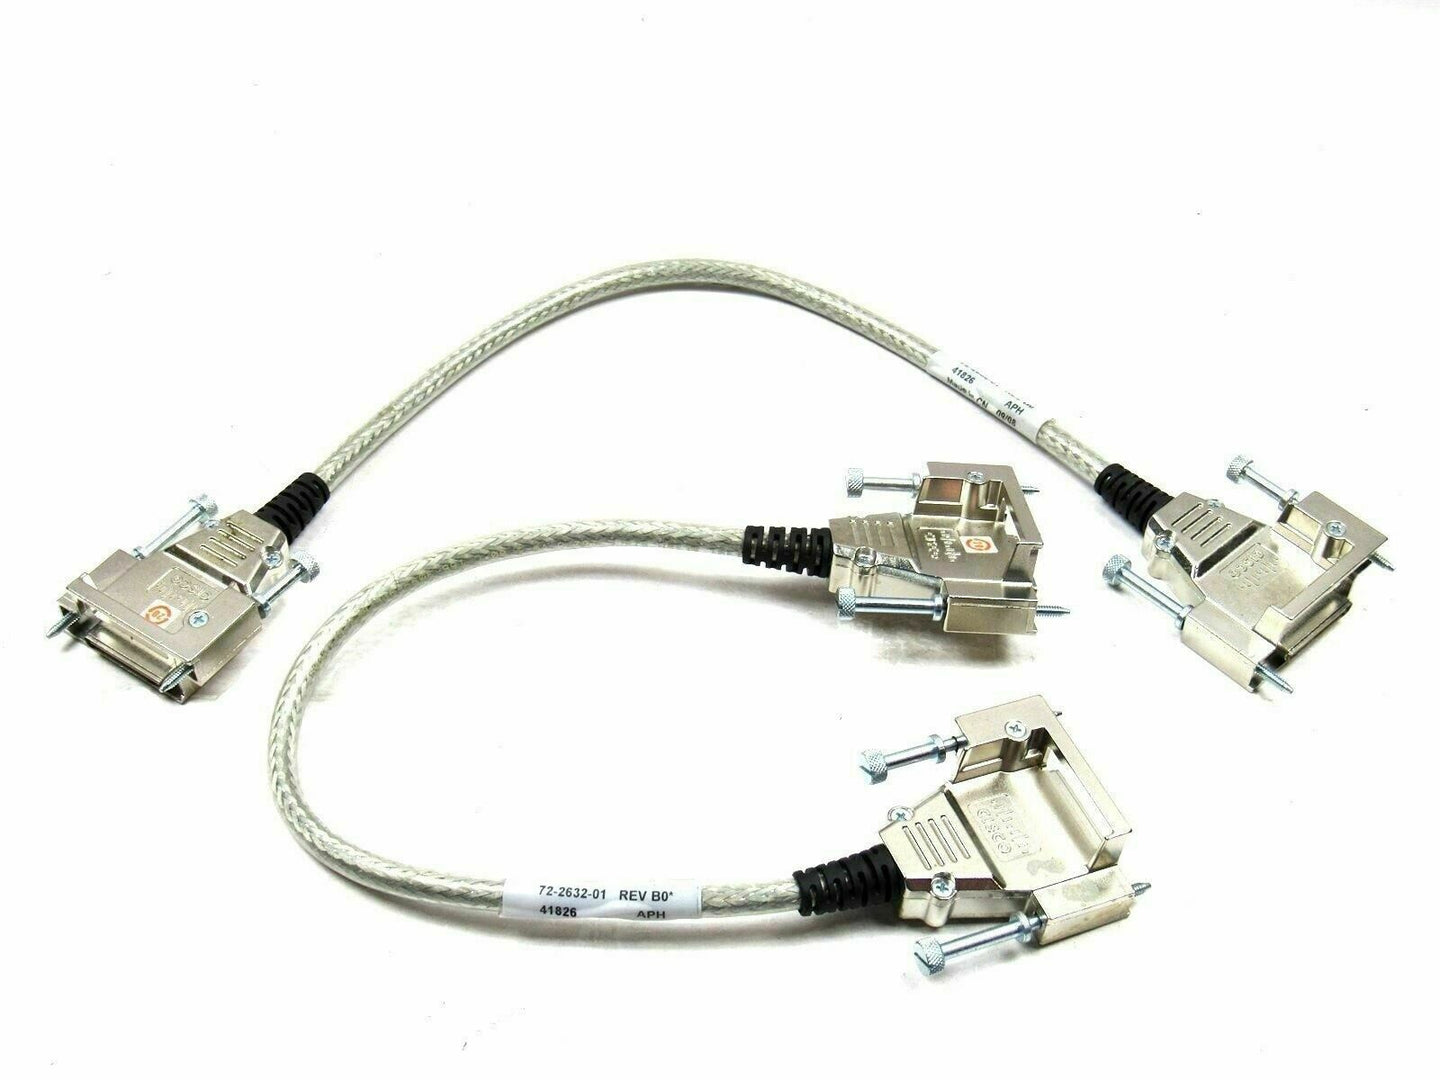 1M Cisco 72-2632-01 Stacking Cable 41826 Rev B0 StackWise 1M